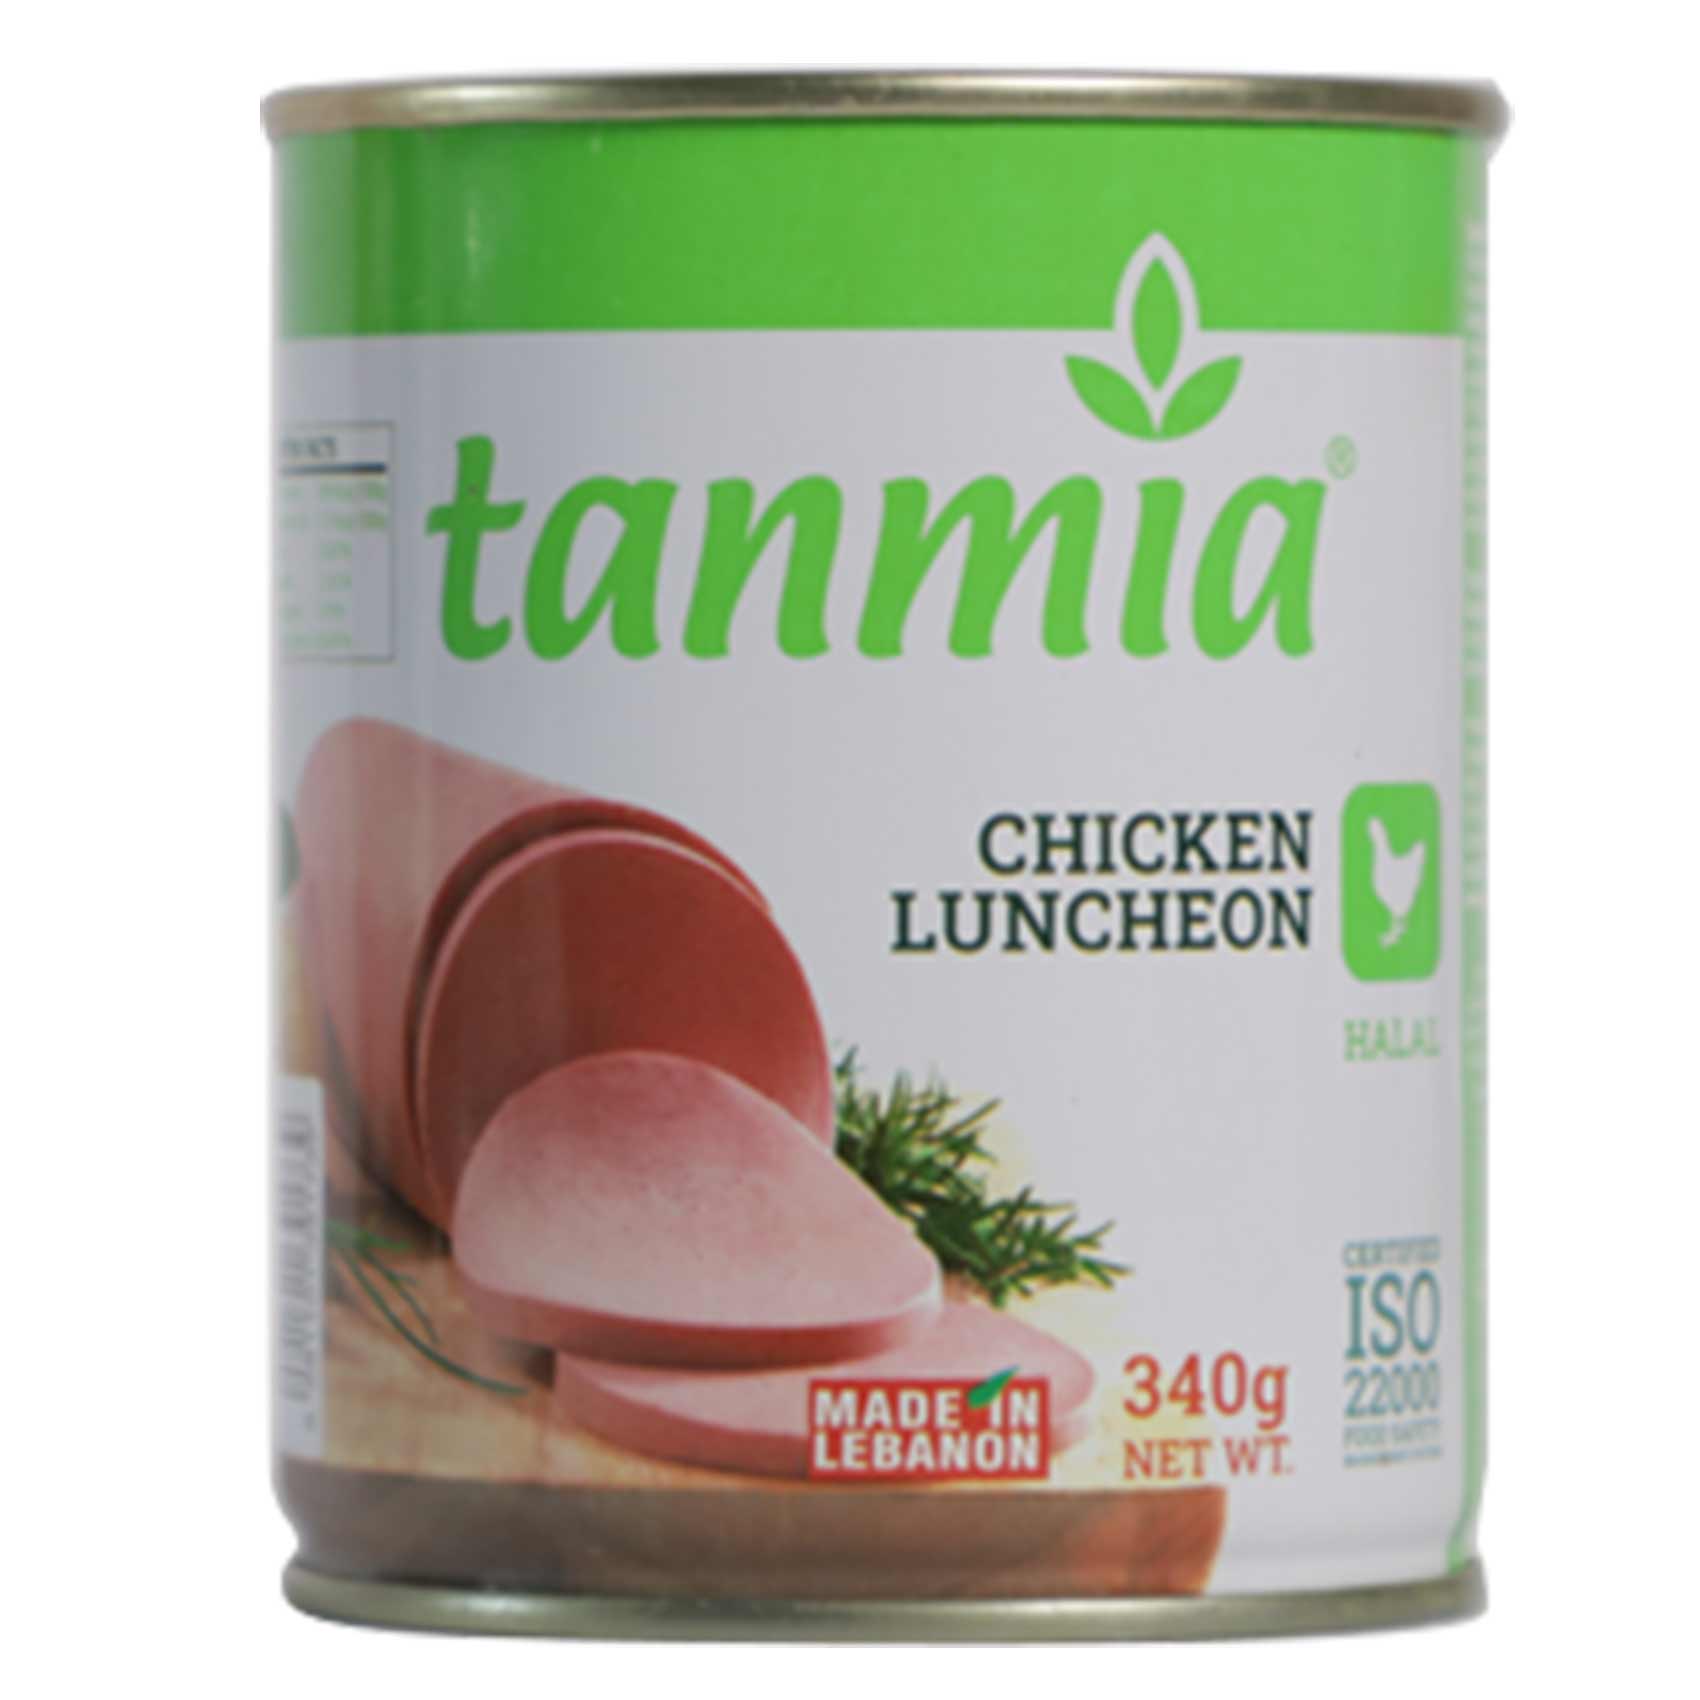 Tanmia Chicken Luncheon 340GR